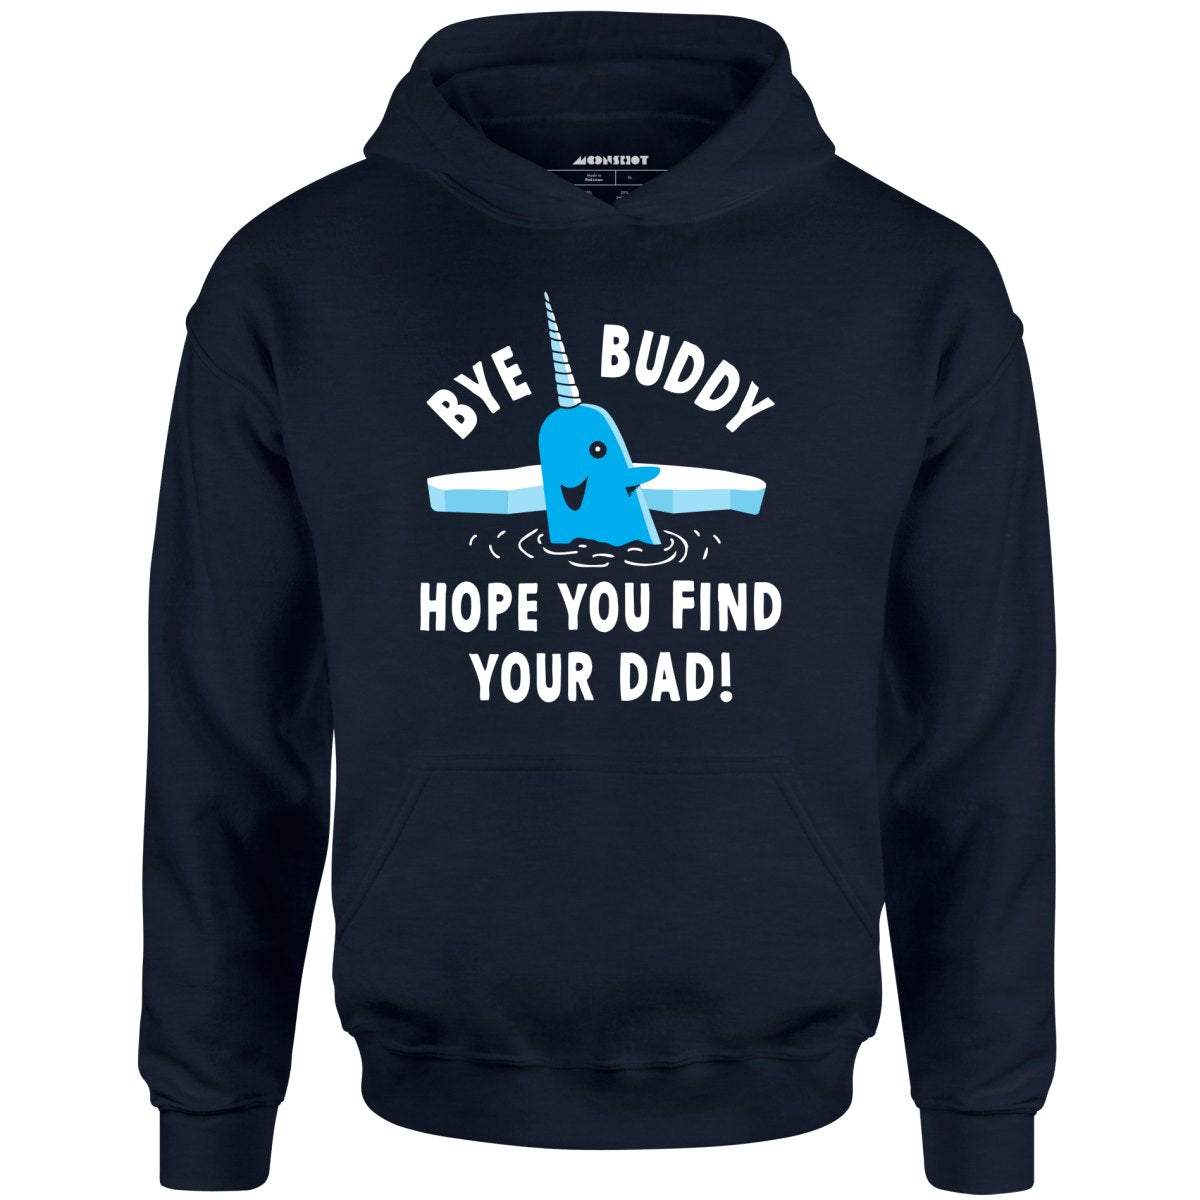 Bye Buddy Hope You Find Your Dad - Unisex Hoodie